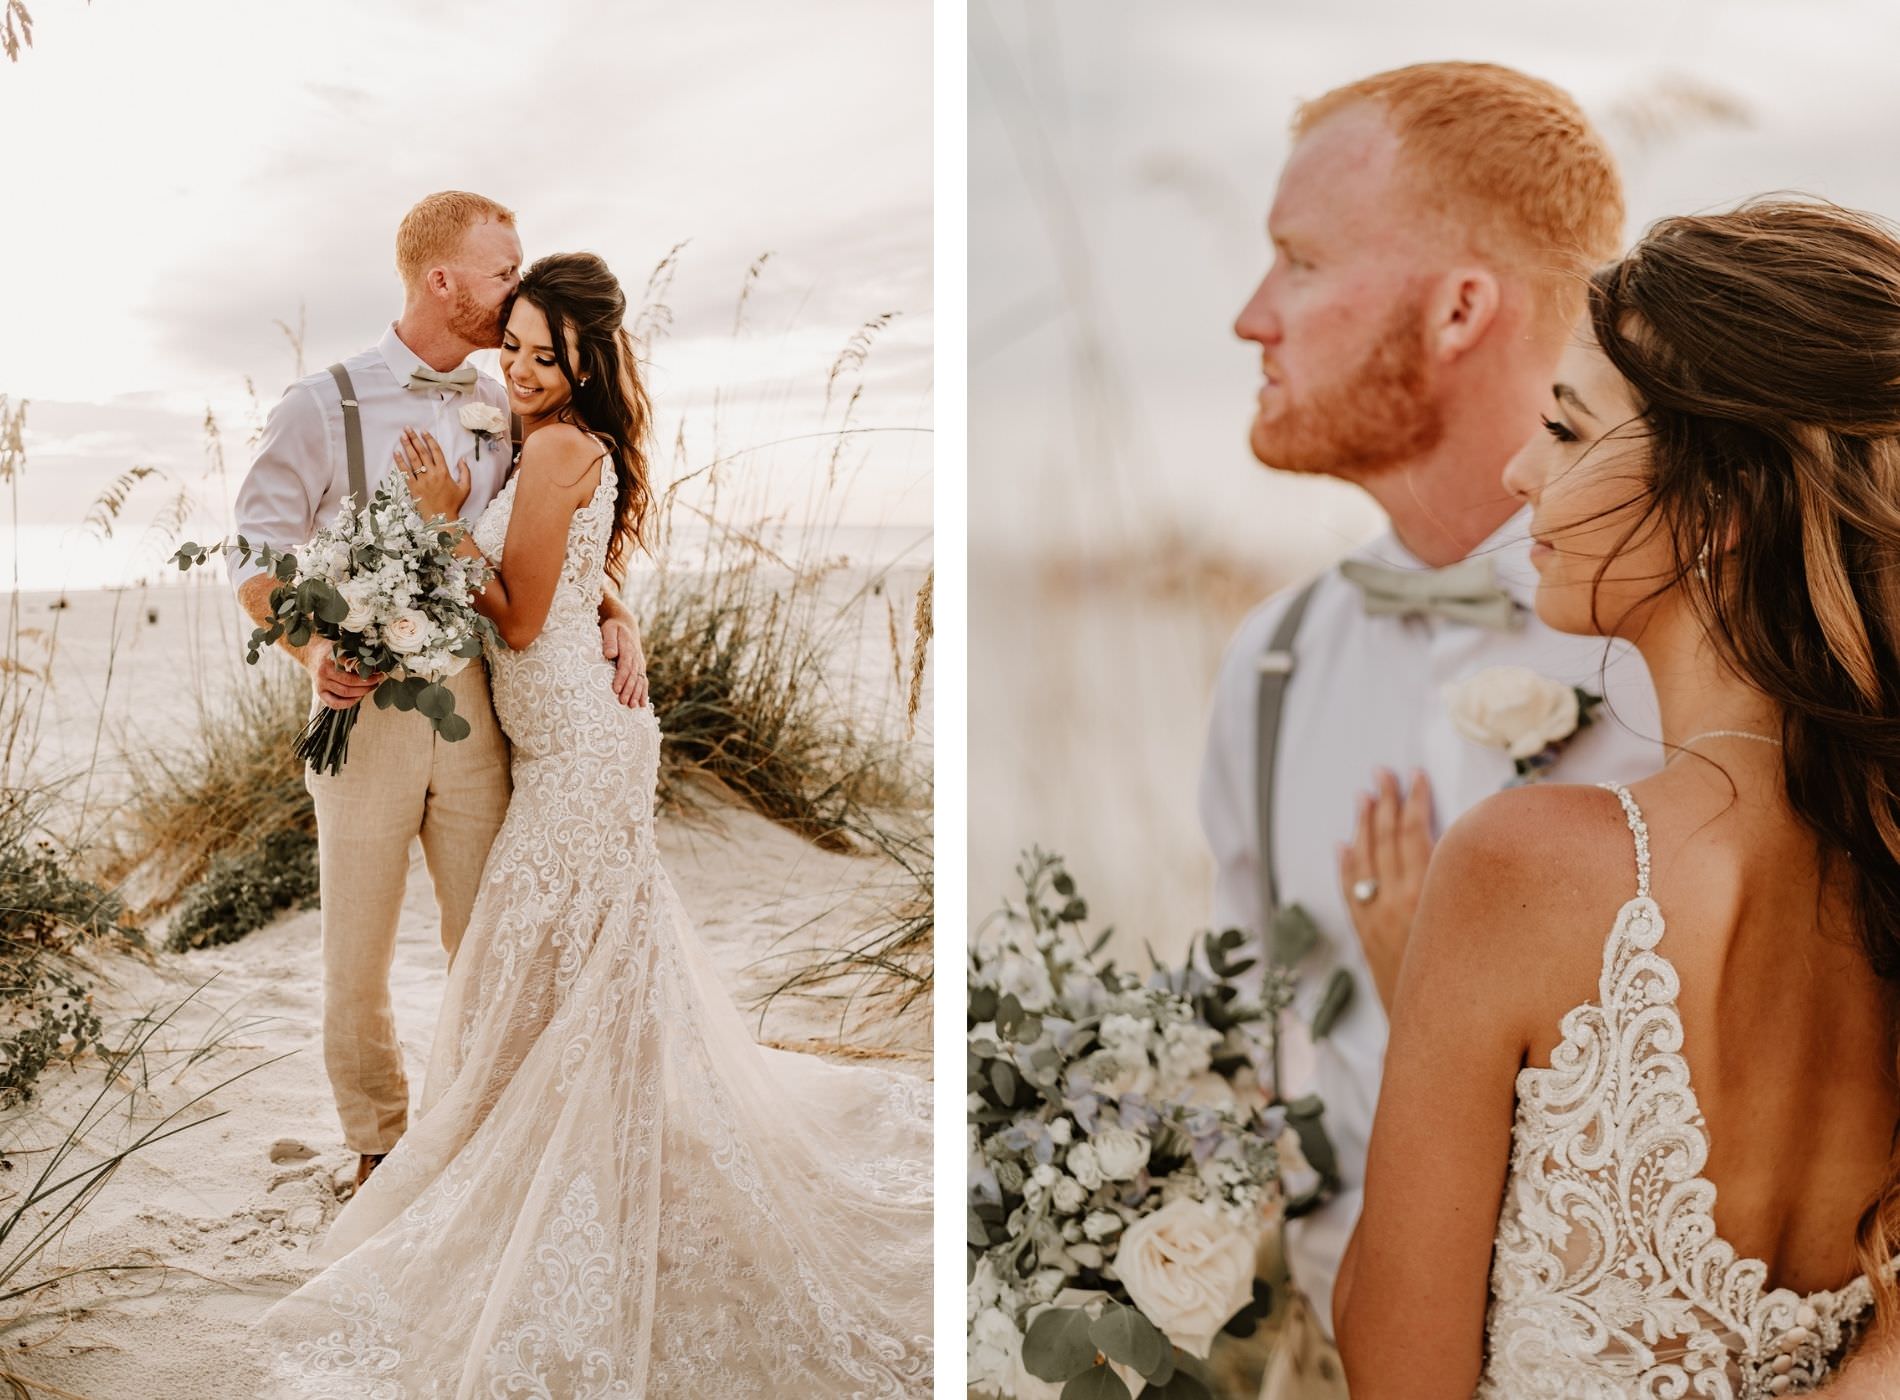 Outdoor Bride and Groom Portrait at Wedding Venue Hilton Clearwater Beach | Allure Bridals Lace Low Back Spaghetti Strap Sheath Bridal Gown Wedding Dress | Groom Wearing Khaki Pants and Grey Suspenders with White Shirt and Bow Tie | Natural Neutral Bridal Bouquet with Eucalyptus Greenery and White Roses